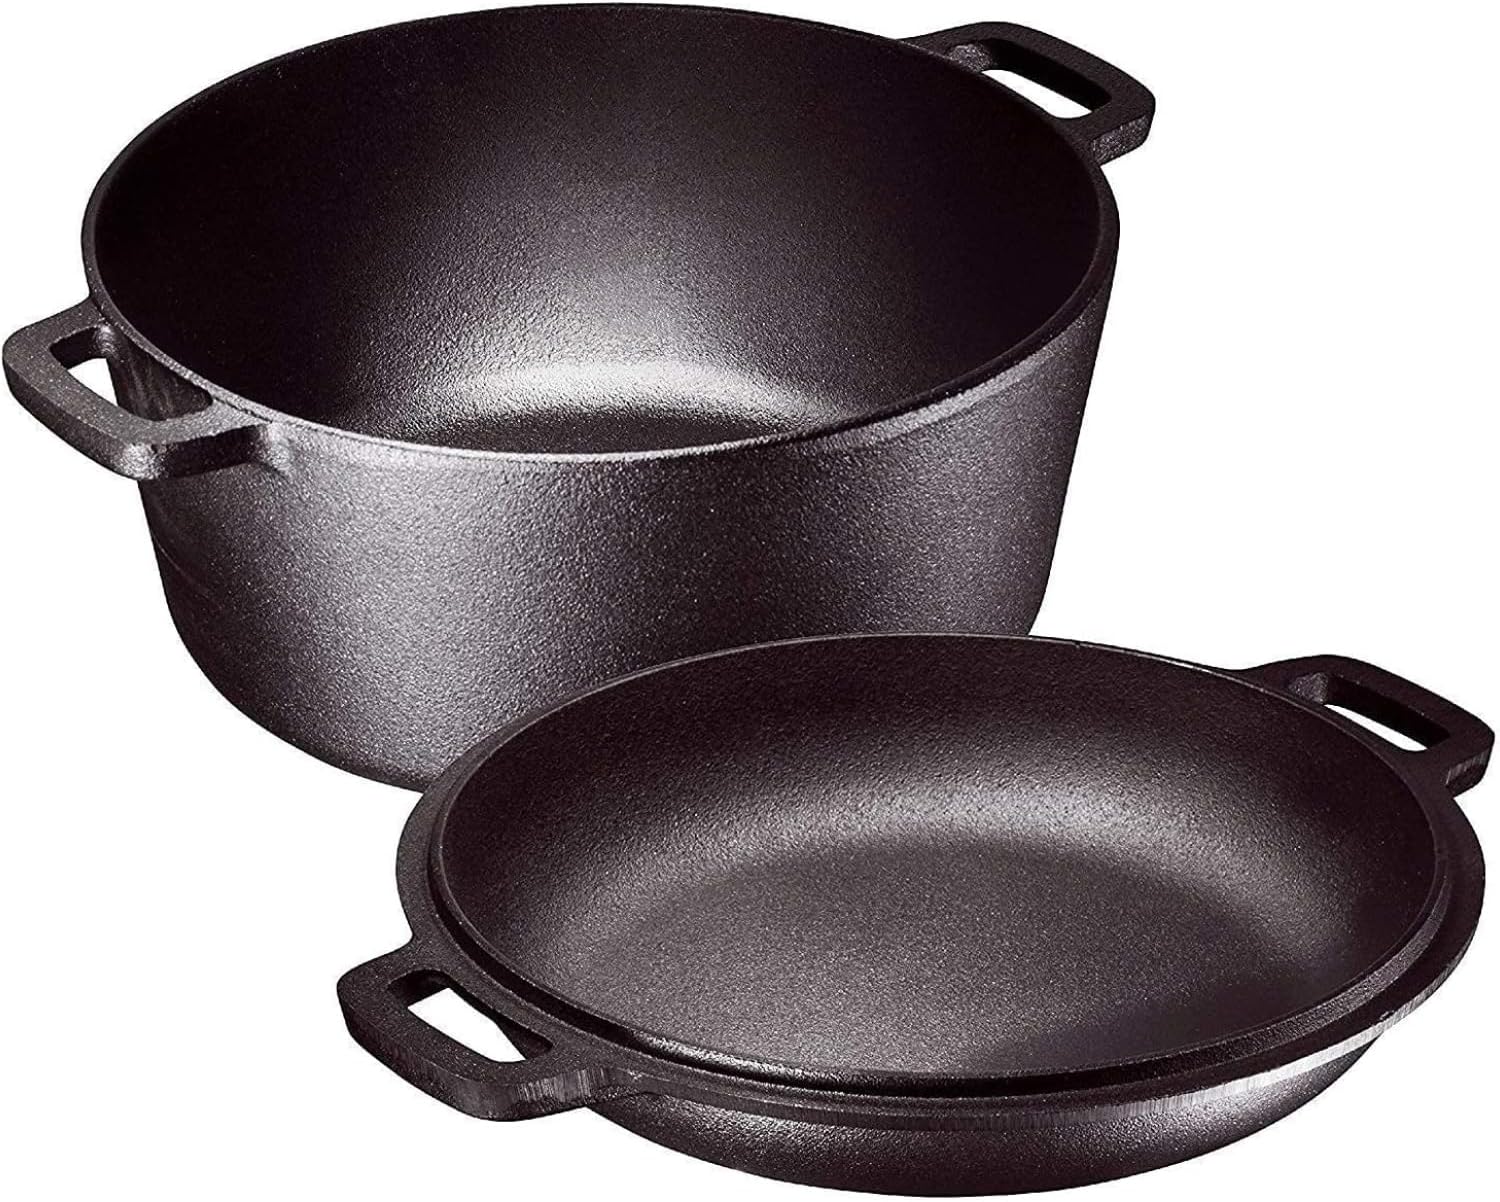 Bruntmor 2-in-1, 5 Quart Pre-seasoned Cast Iron Dutch Oven With Double Handles, 1.6 Quart Skillet lid with dual Handles for frying, Grill, Roating, Perfect for induction, Stovetop, BBQ Camping